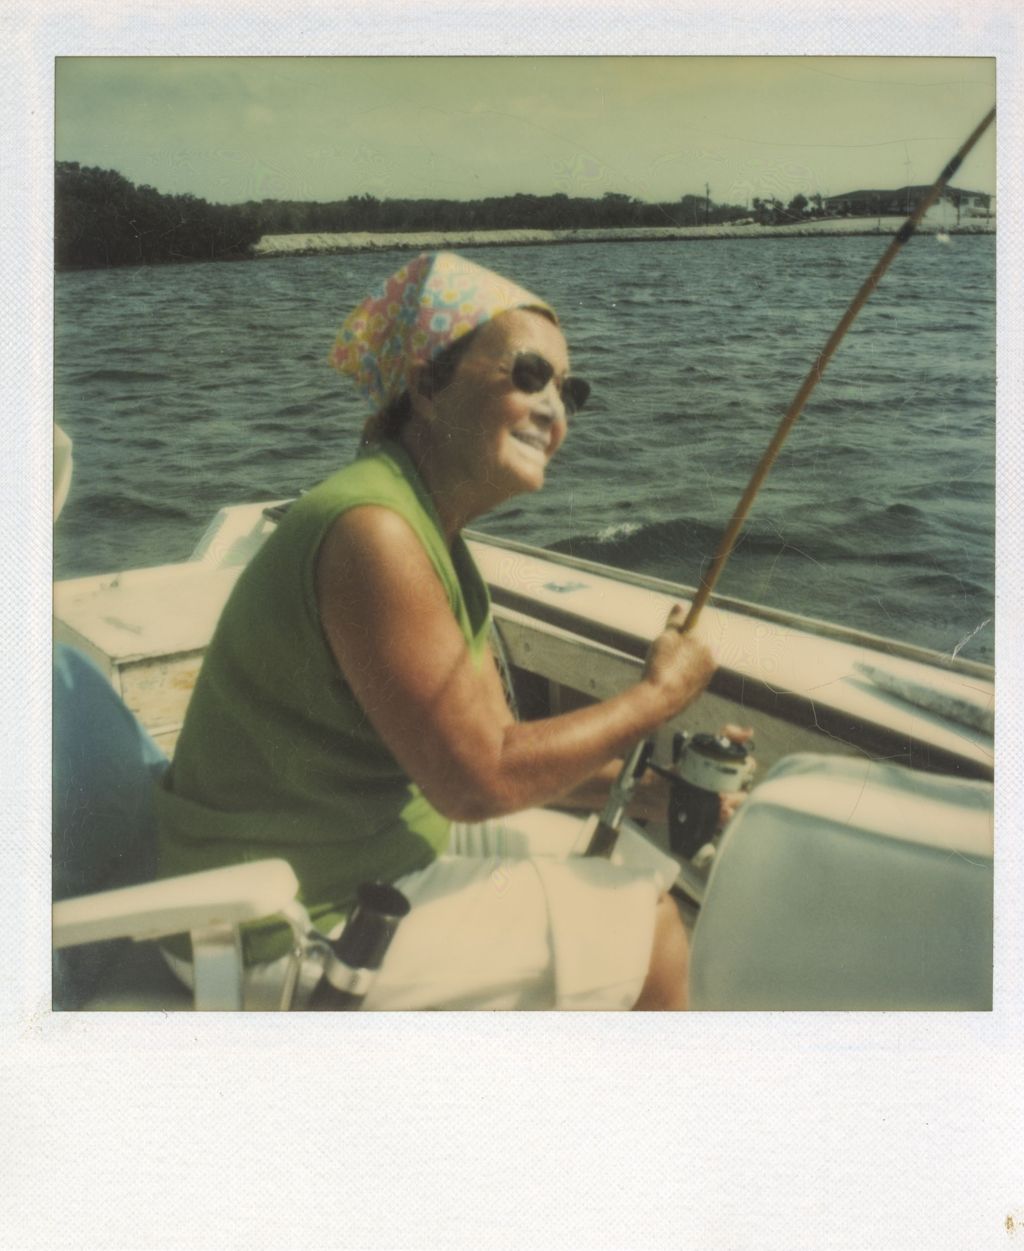 Eleanor Daley fishing from a boat